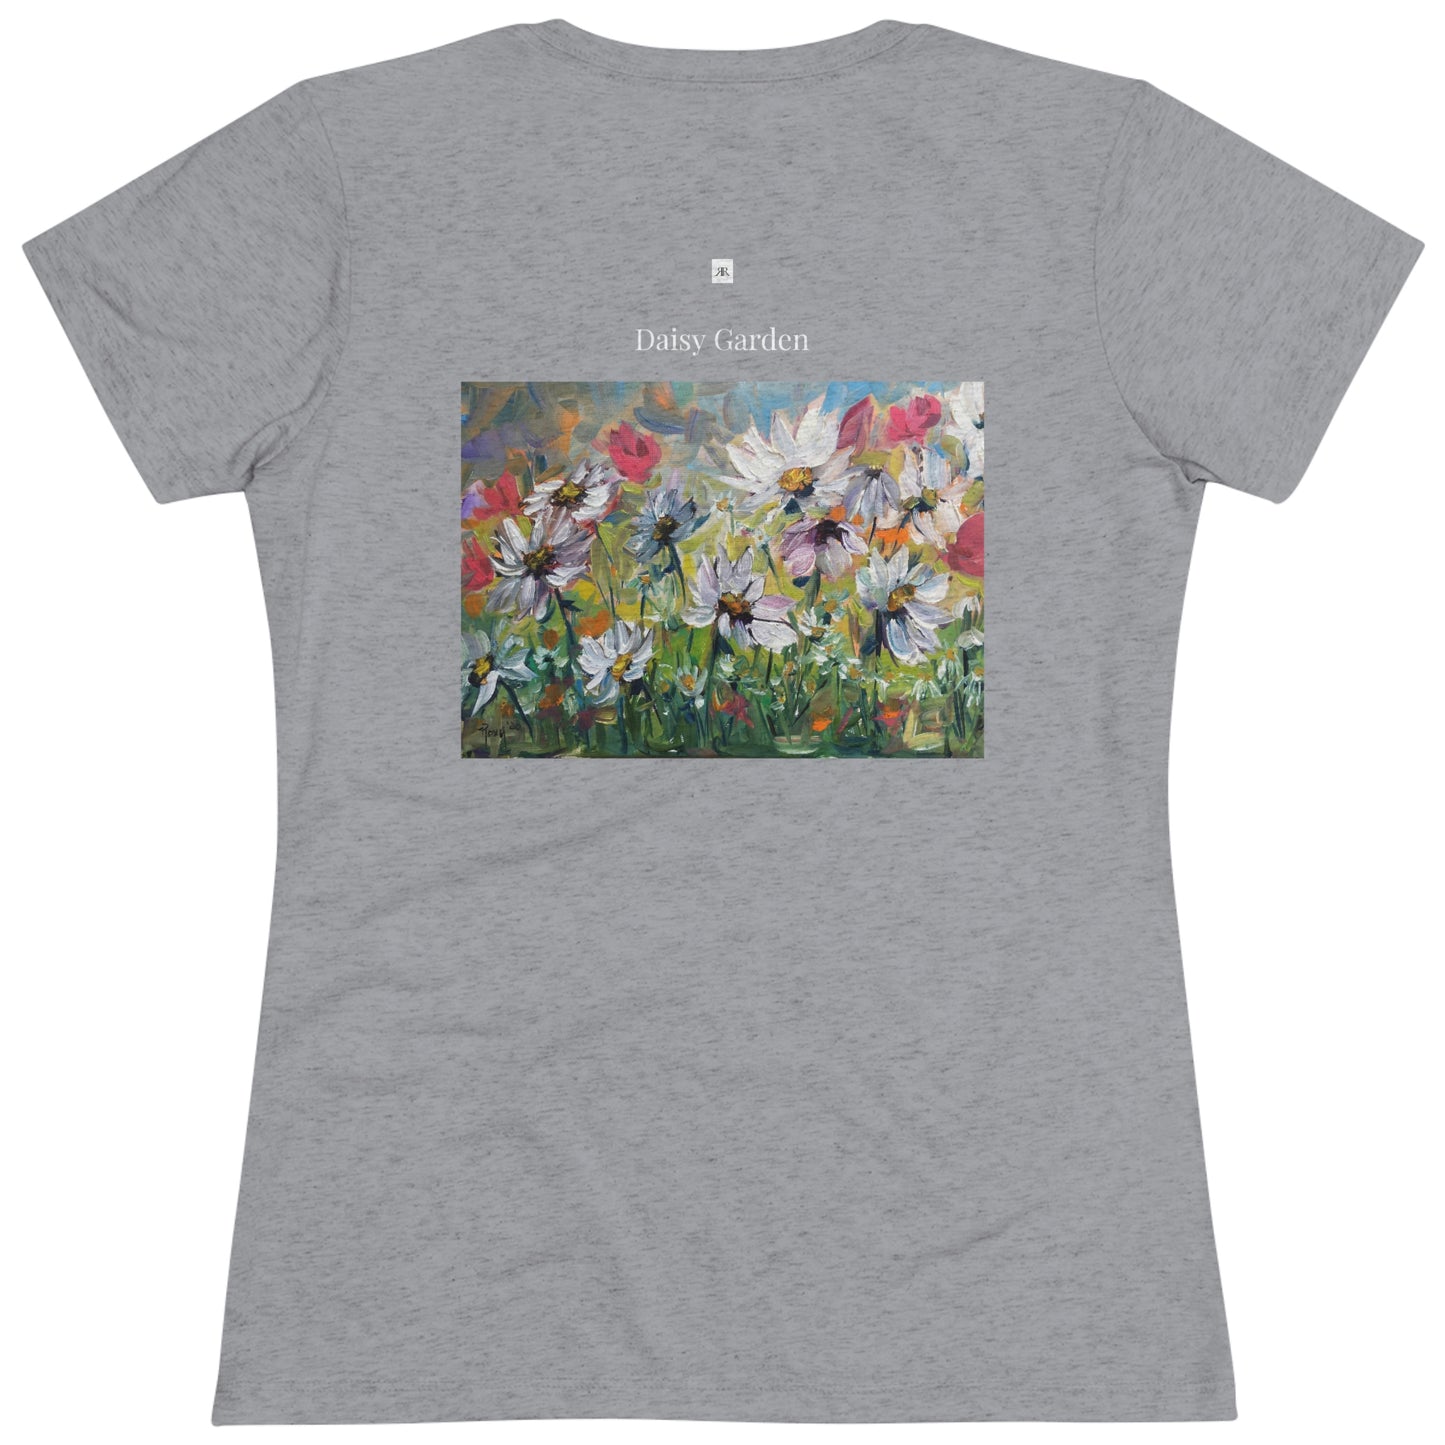 Daisy Garden (image on back) Women's fitted Triblend Tee  tee shirt